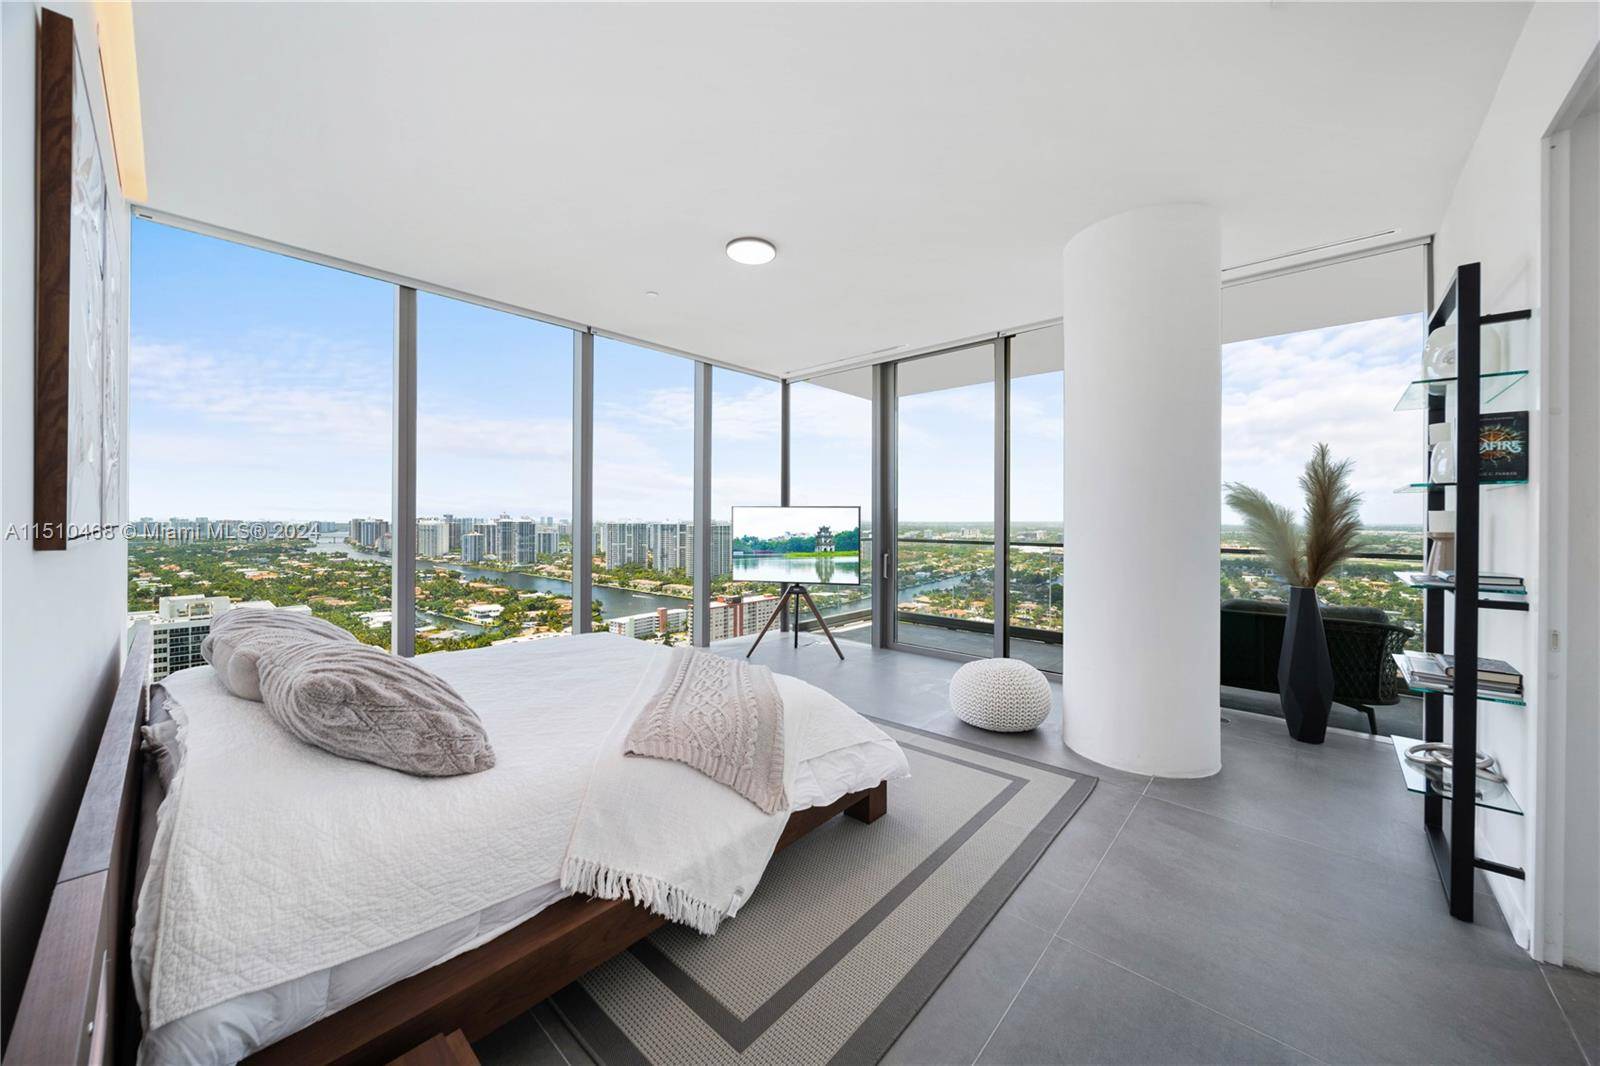 Breathtaking fully furnished half floor residence with east to west views from sunrise to sunset.